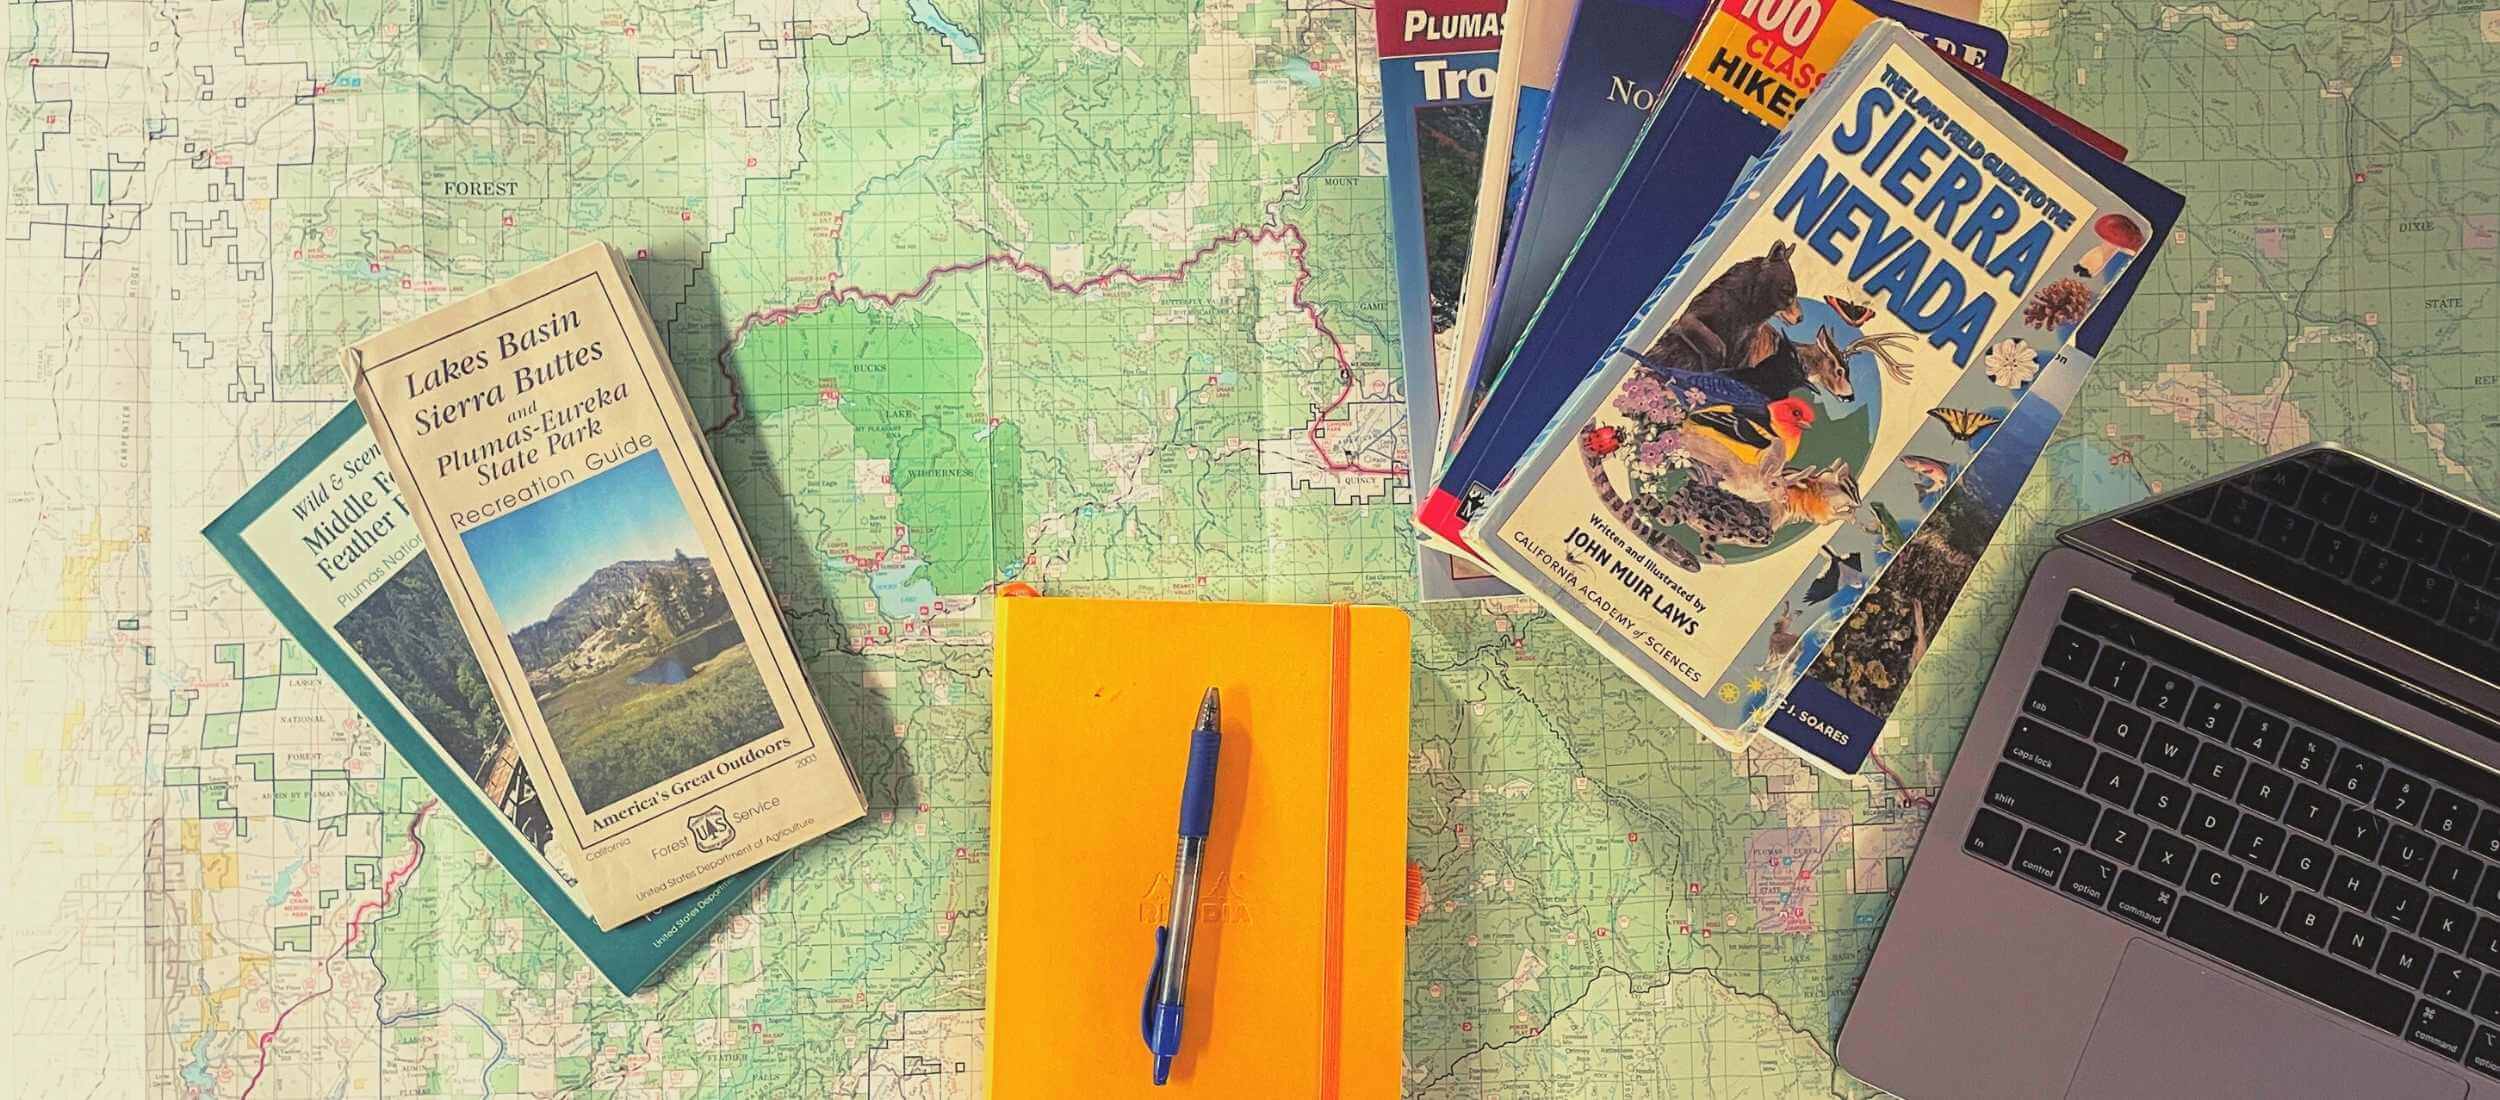 plumas county maps and guide books